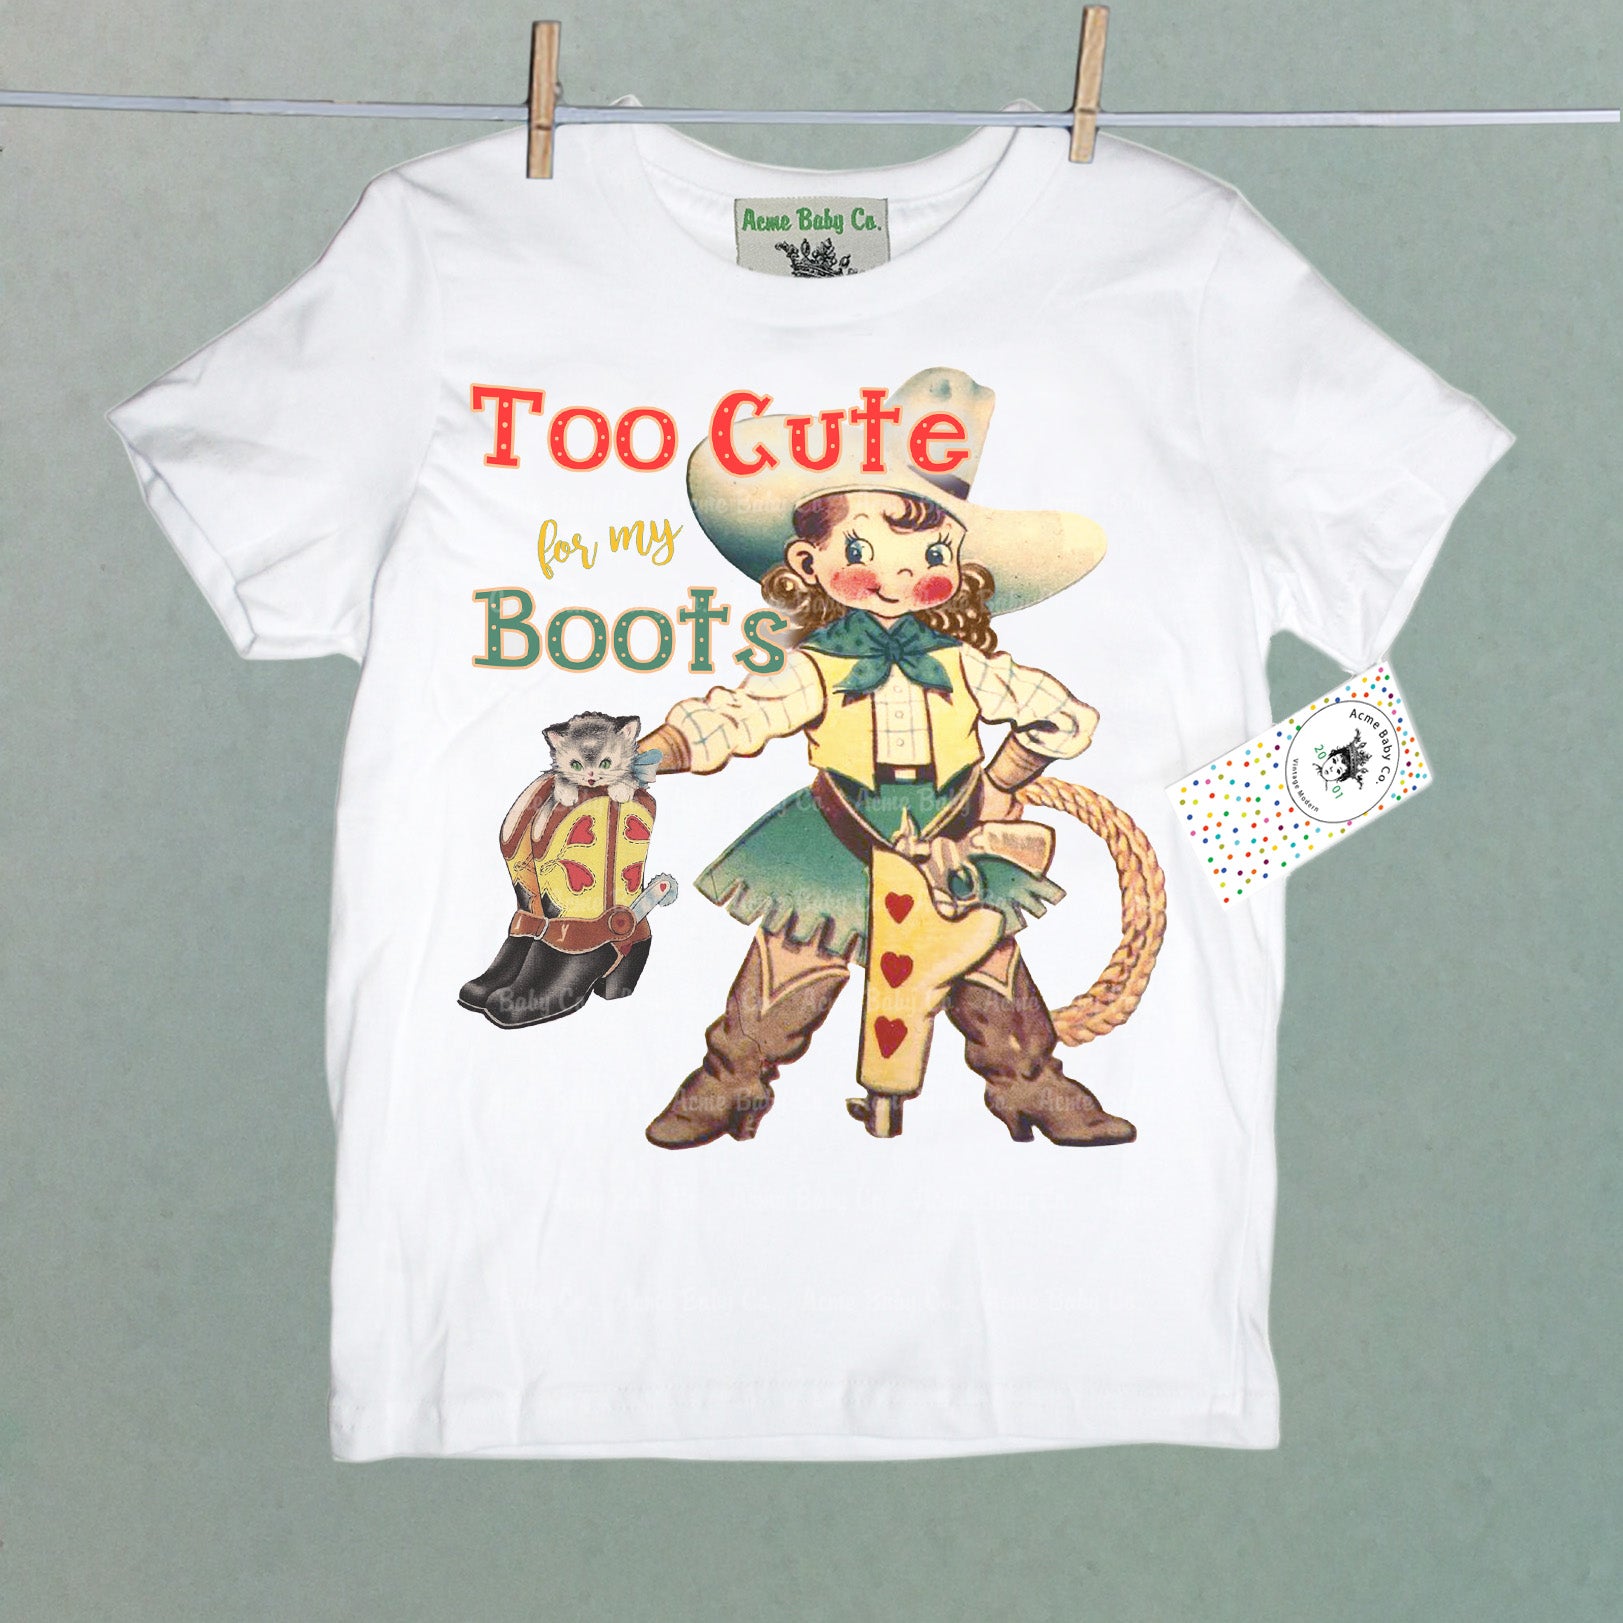 Too Cute for My Boots Organic Children's Shirt